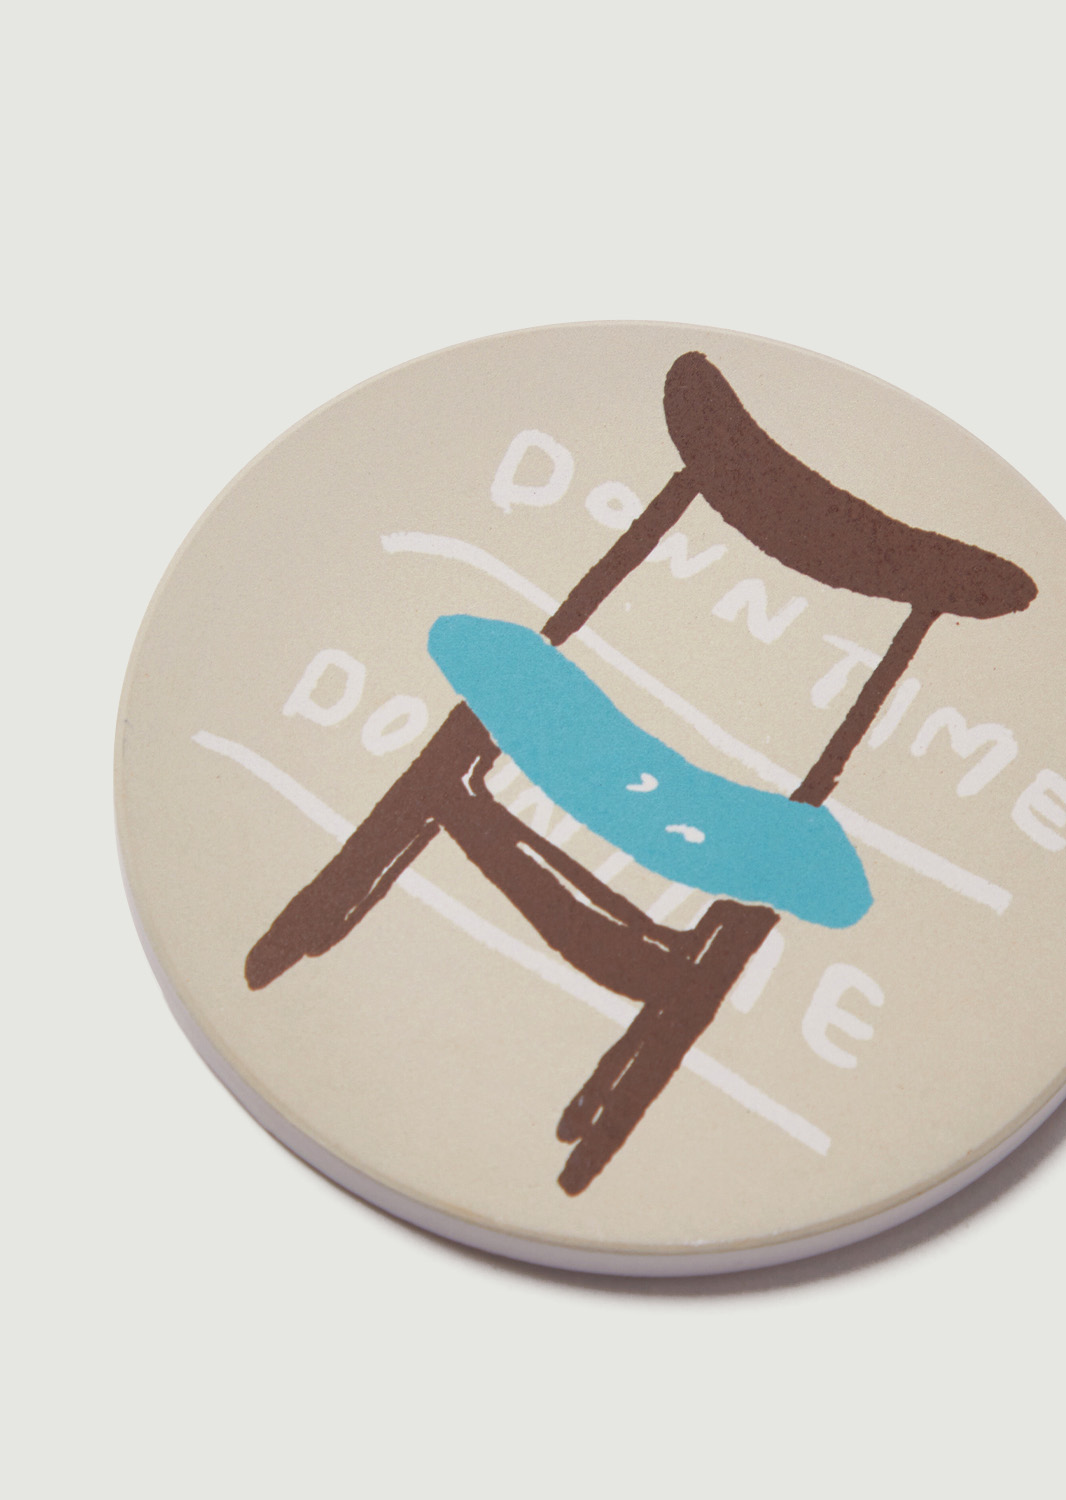 ‘DOWNTIME’ Coaster